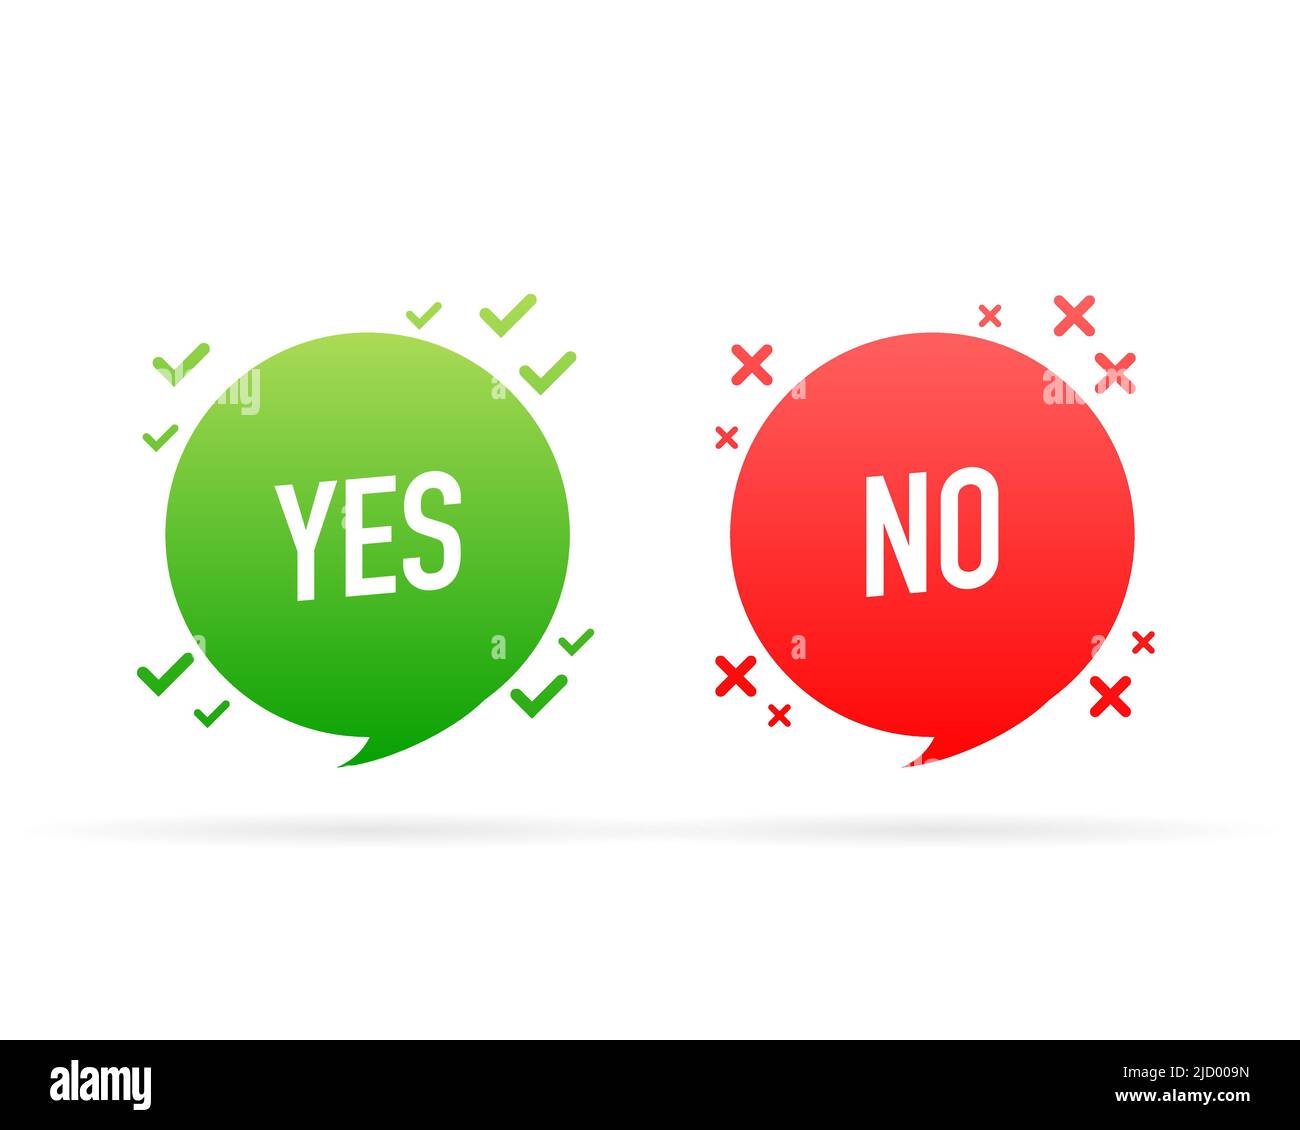 Yes or no doodle green and red illustration on white background. Vector illustration. Stock Vector